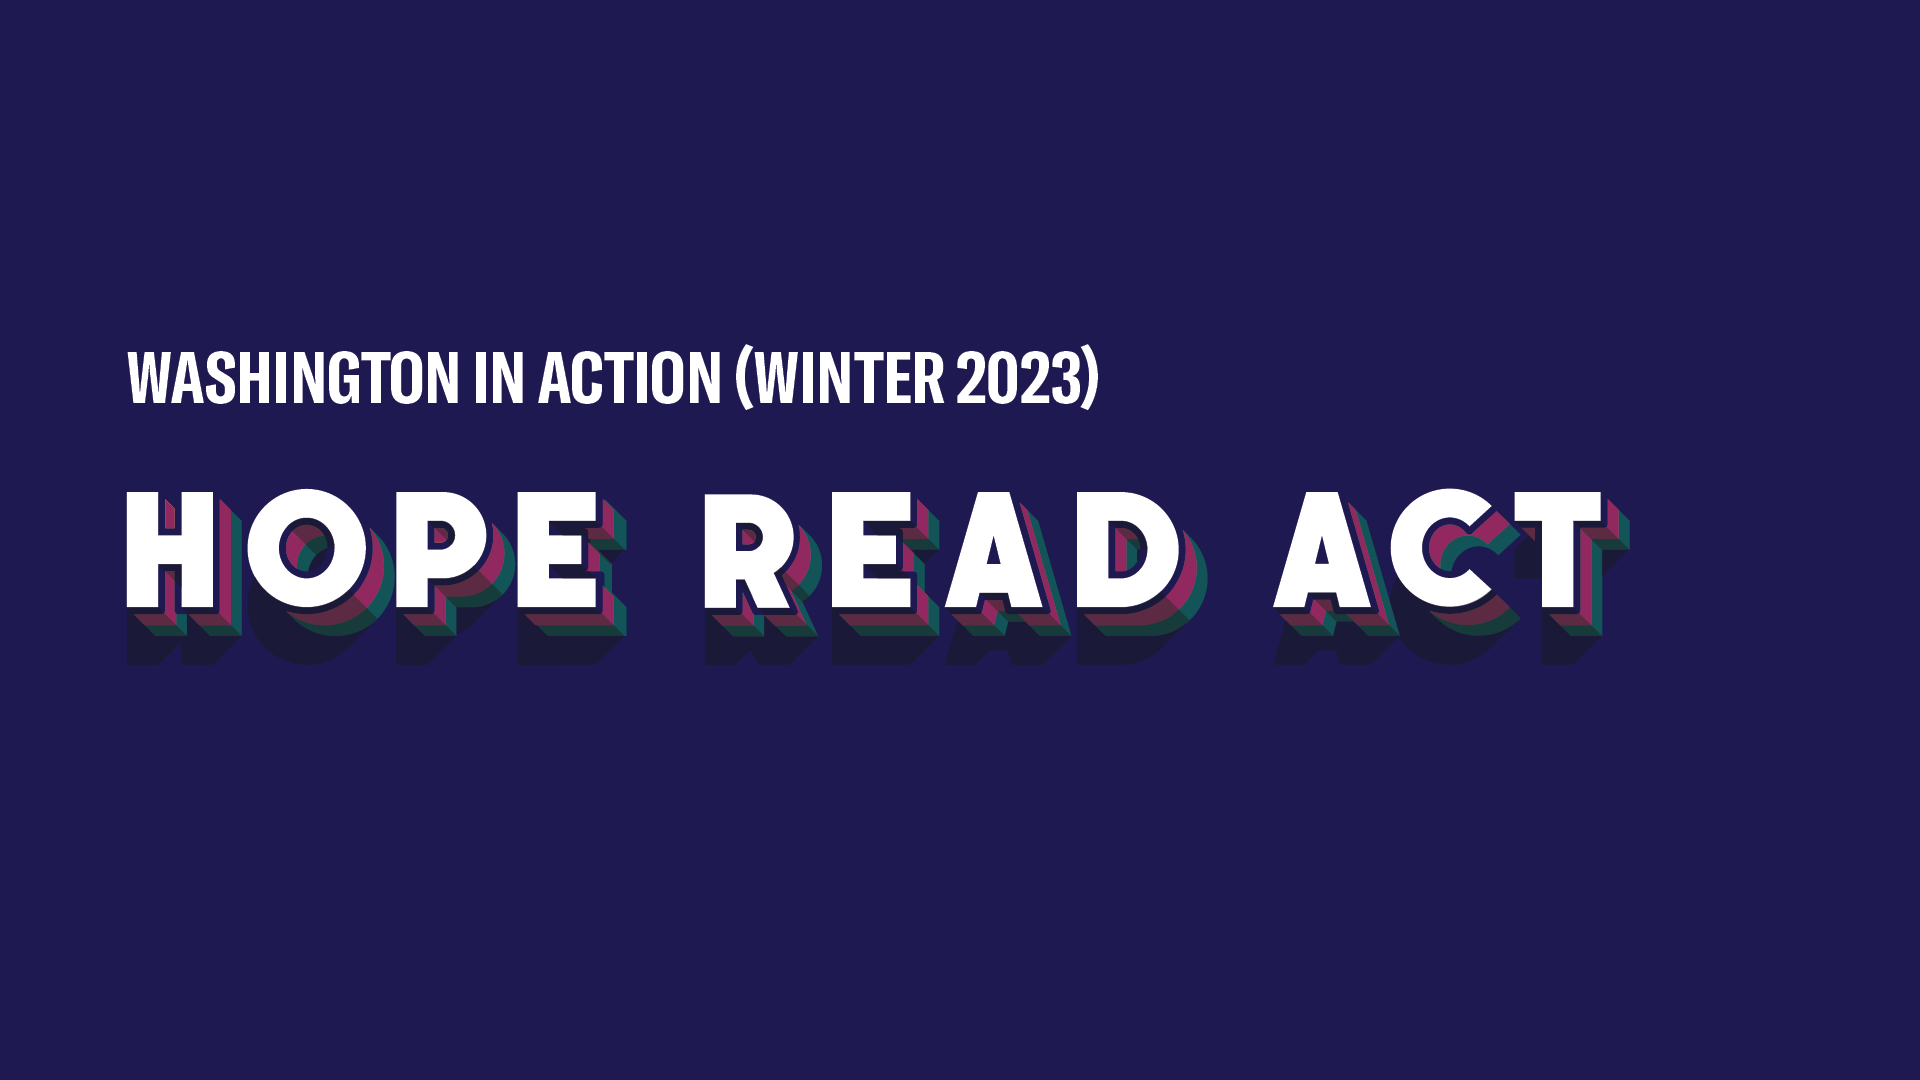 Washington in Action Winter 2023 Hope Read Act